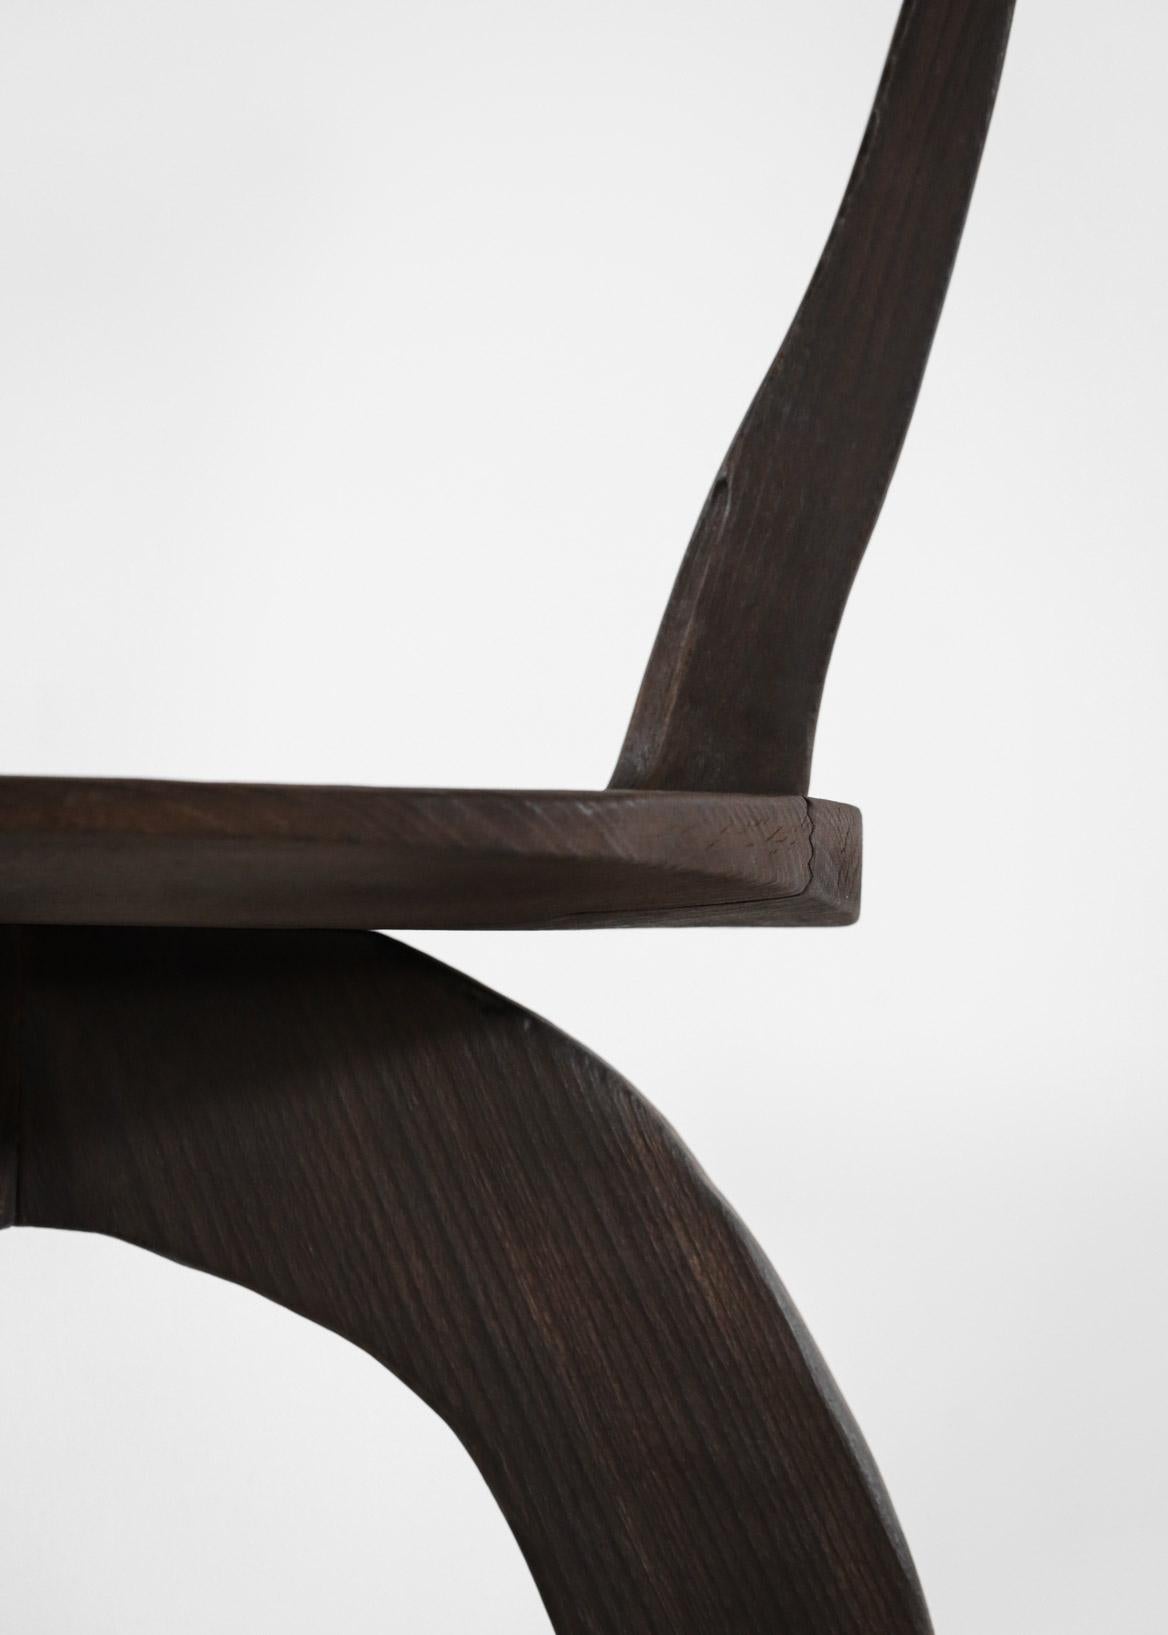 French Modern Handcrafted Wooden Chair 80/20 by Vincent Vincent olavi hanninen perriand For Sale